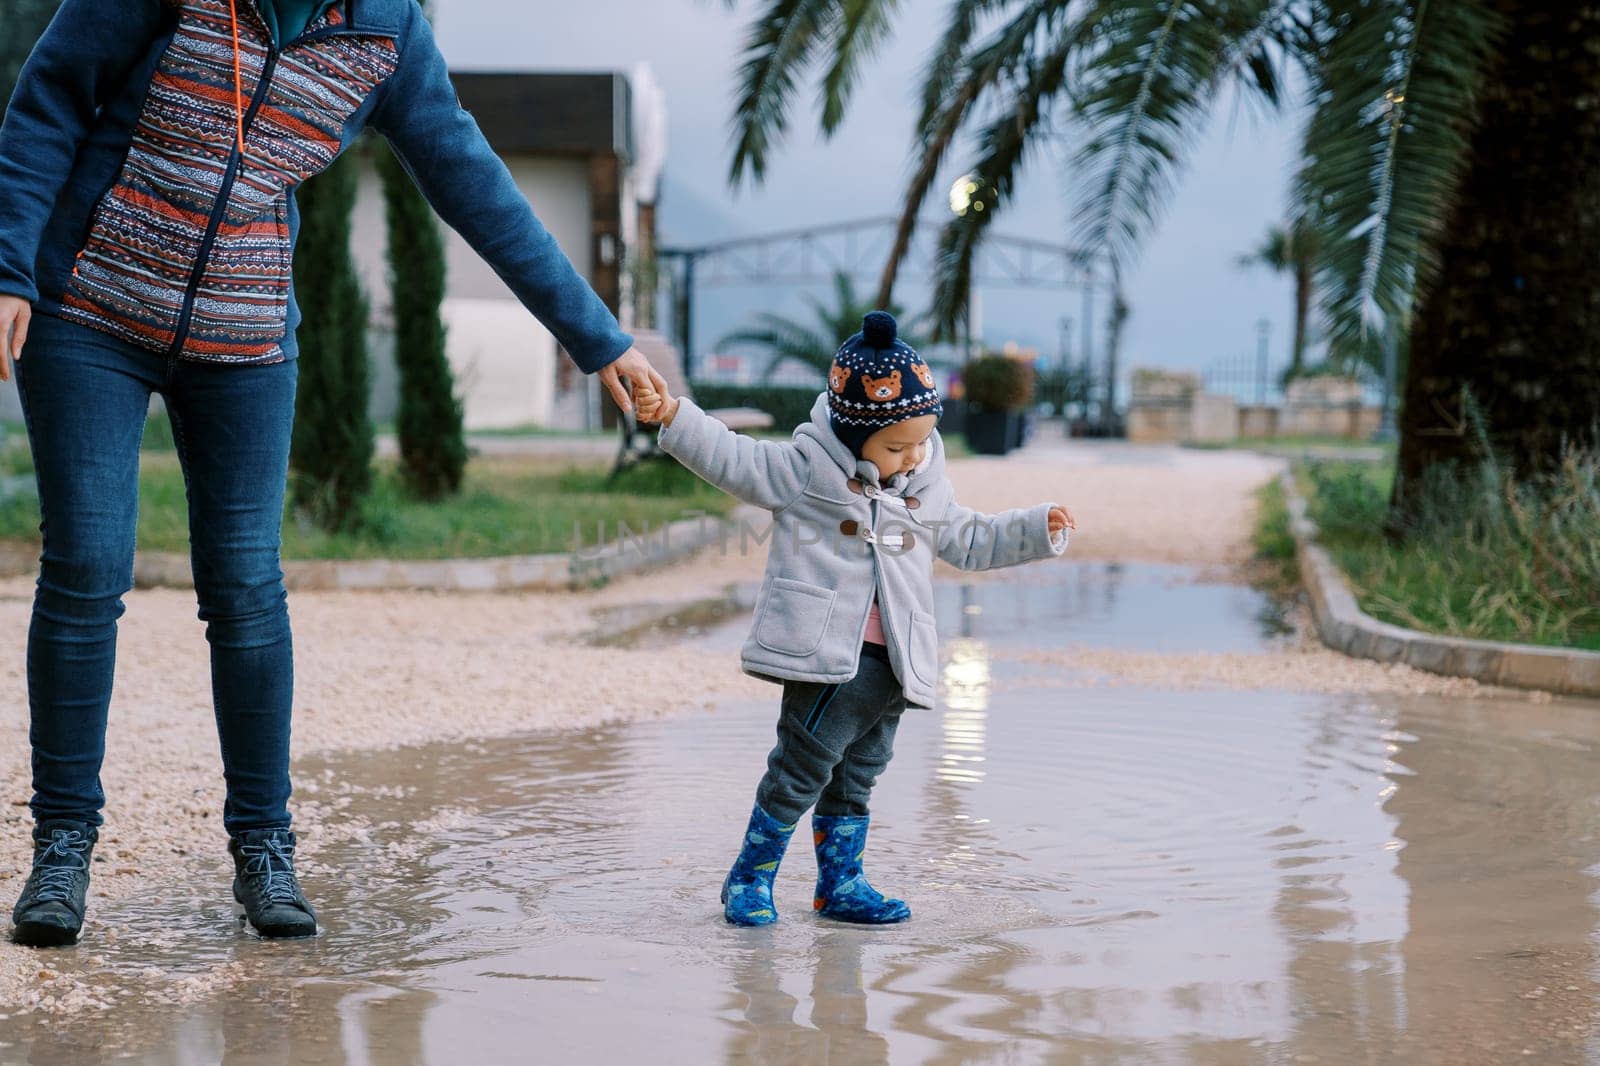 Little girl in rubber boots stands in a puddle holding her mother hand. Cropped by Nadtochiy